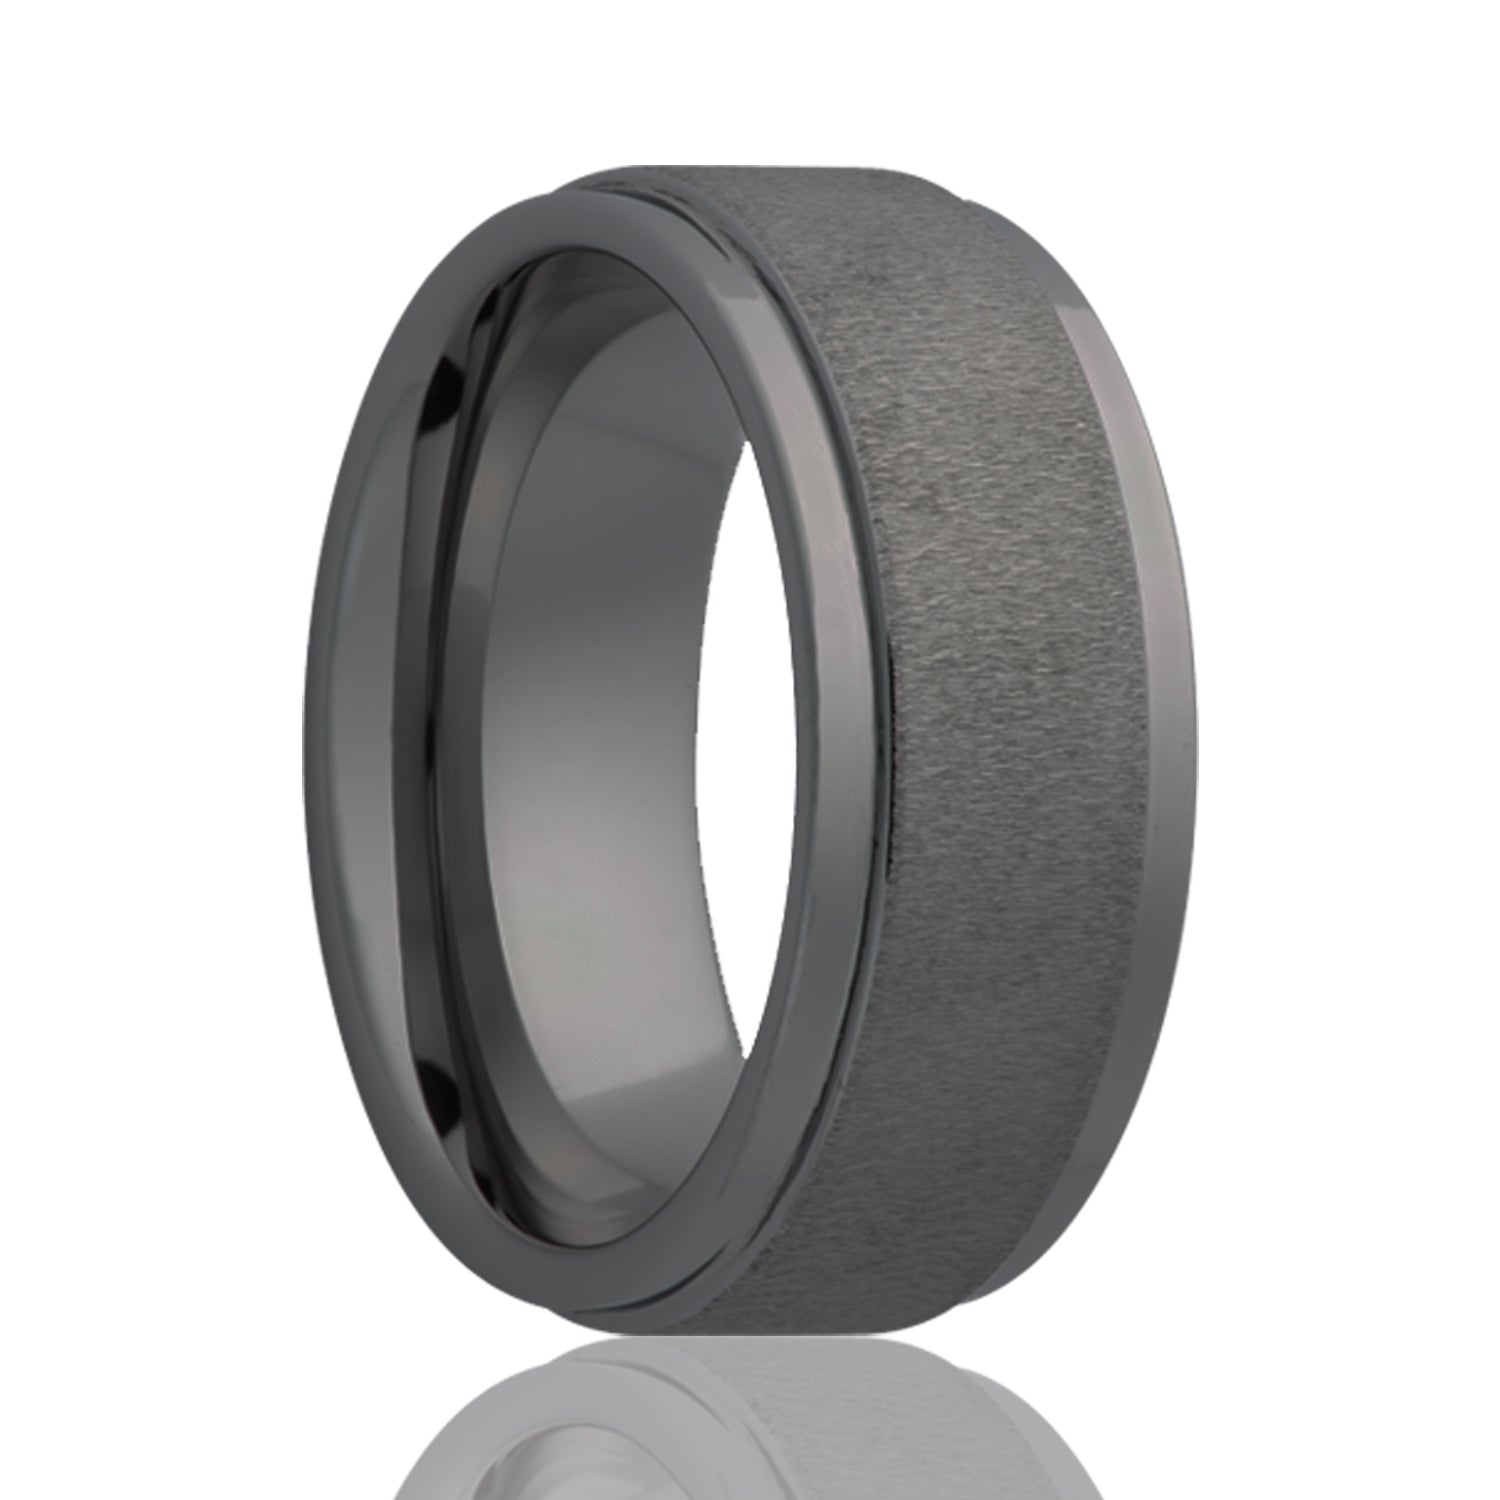 A textured finish black ceramic men's wedding band with stepped edges displayed on a neutral white background.